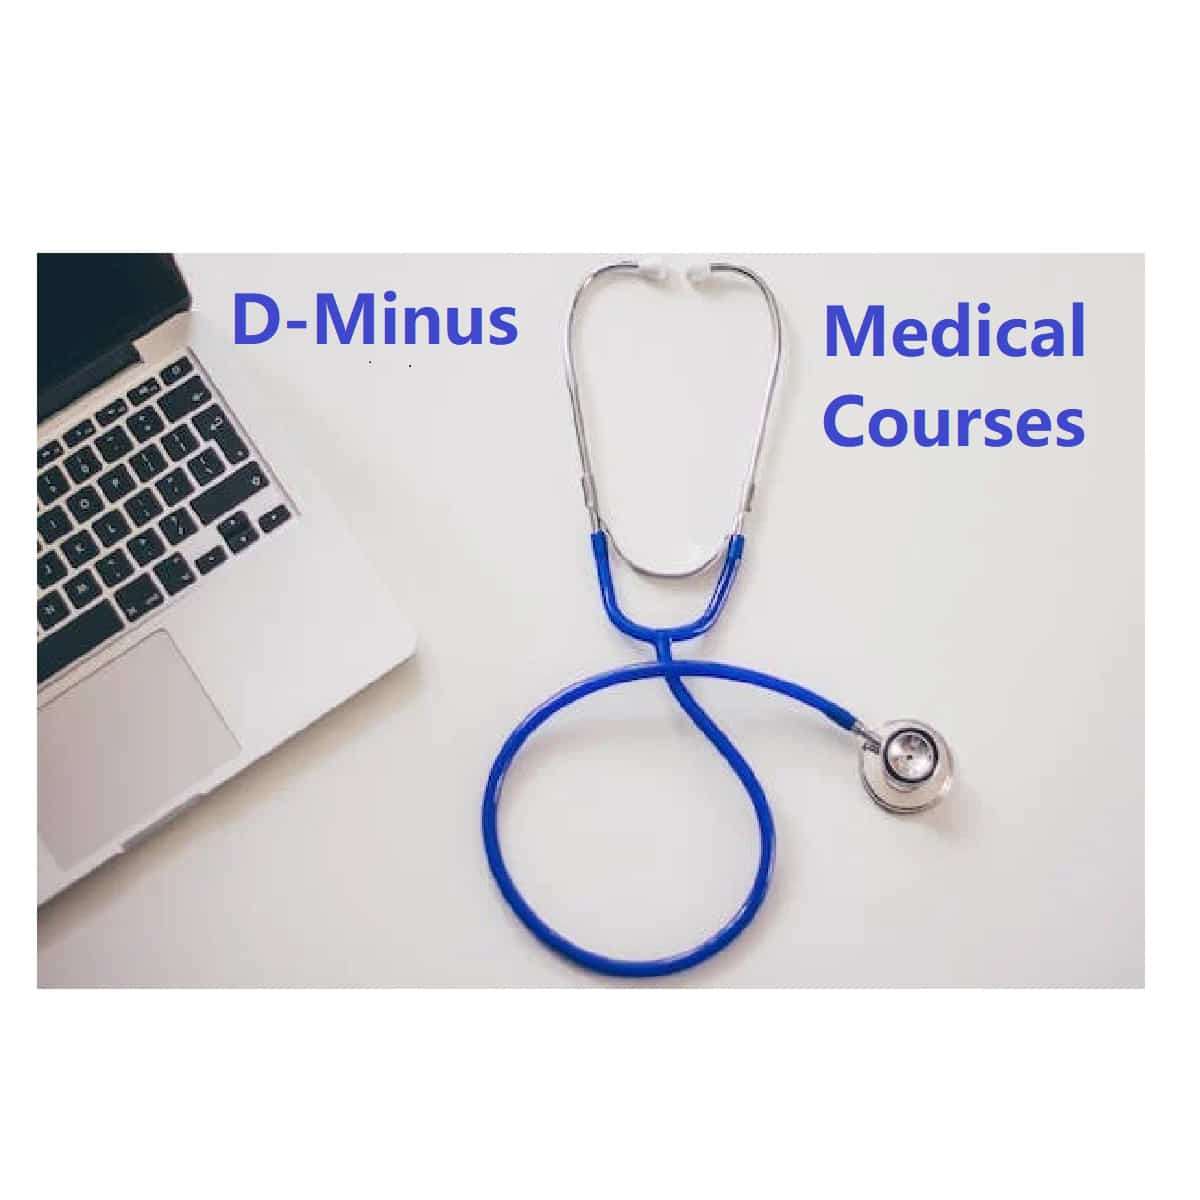 Medical courses with D minus